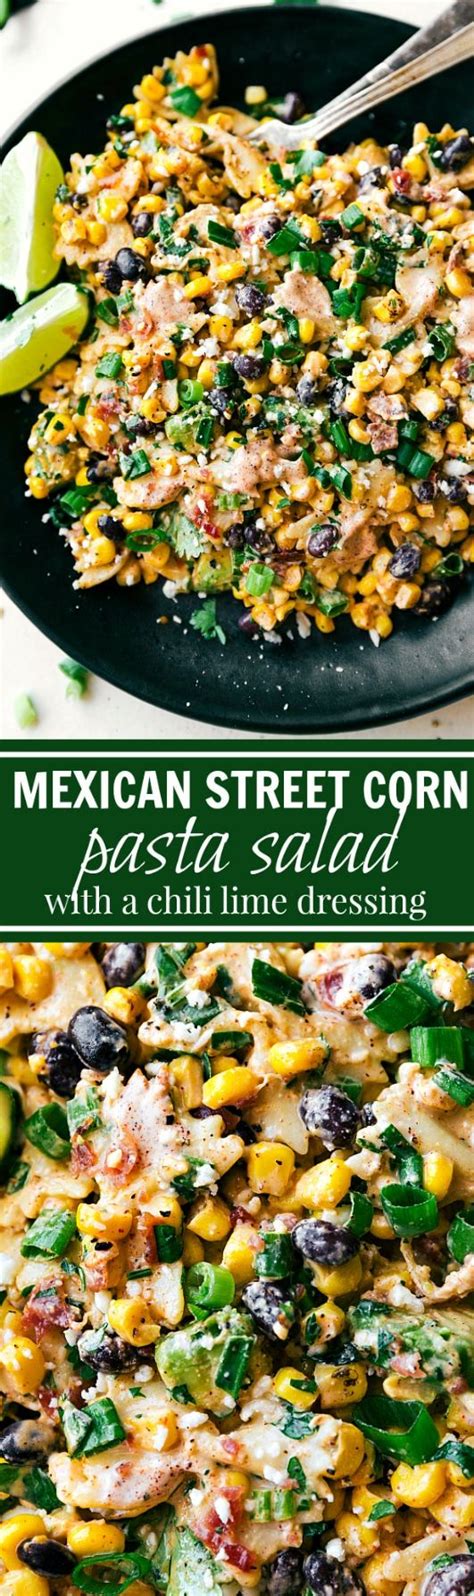 There is a tendency to hold the corn cobs straight up and vertical while slicing. A delicious MEXICAN STREET CORN Pasta salad with tons of veggies, bacon, and a simple creamy ...